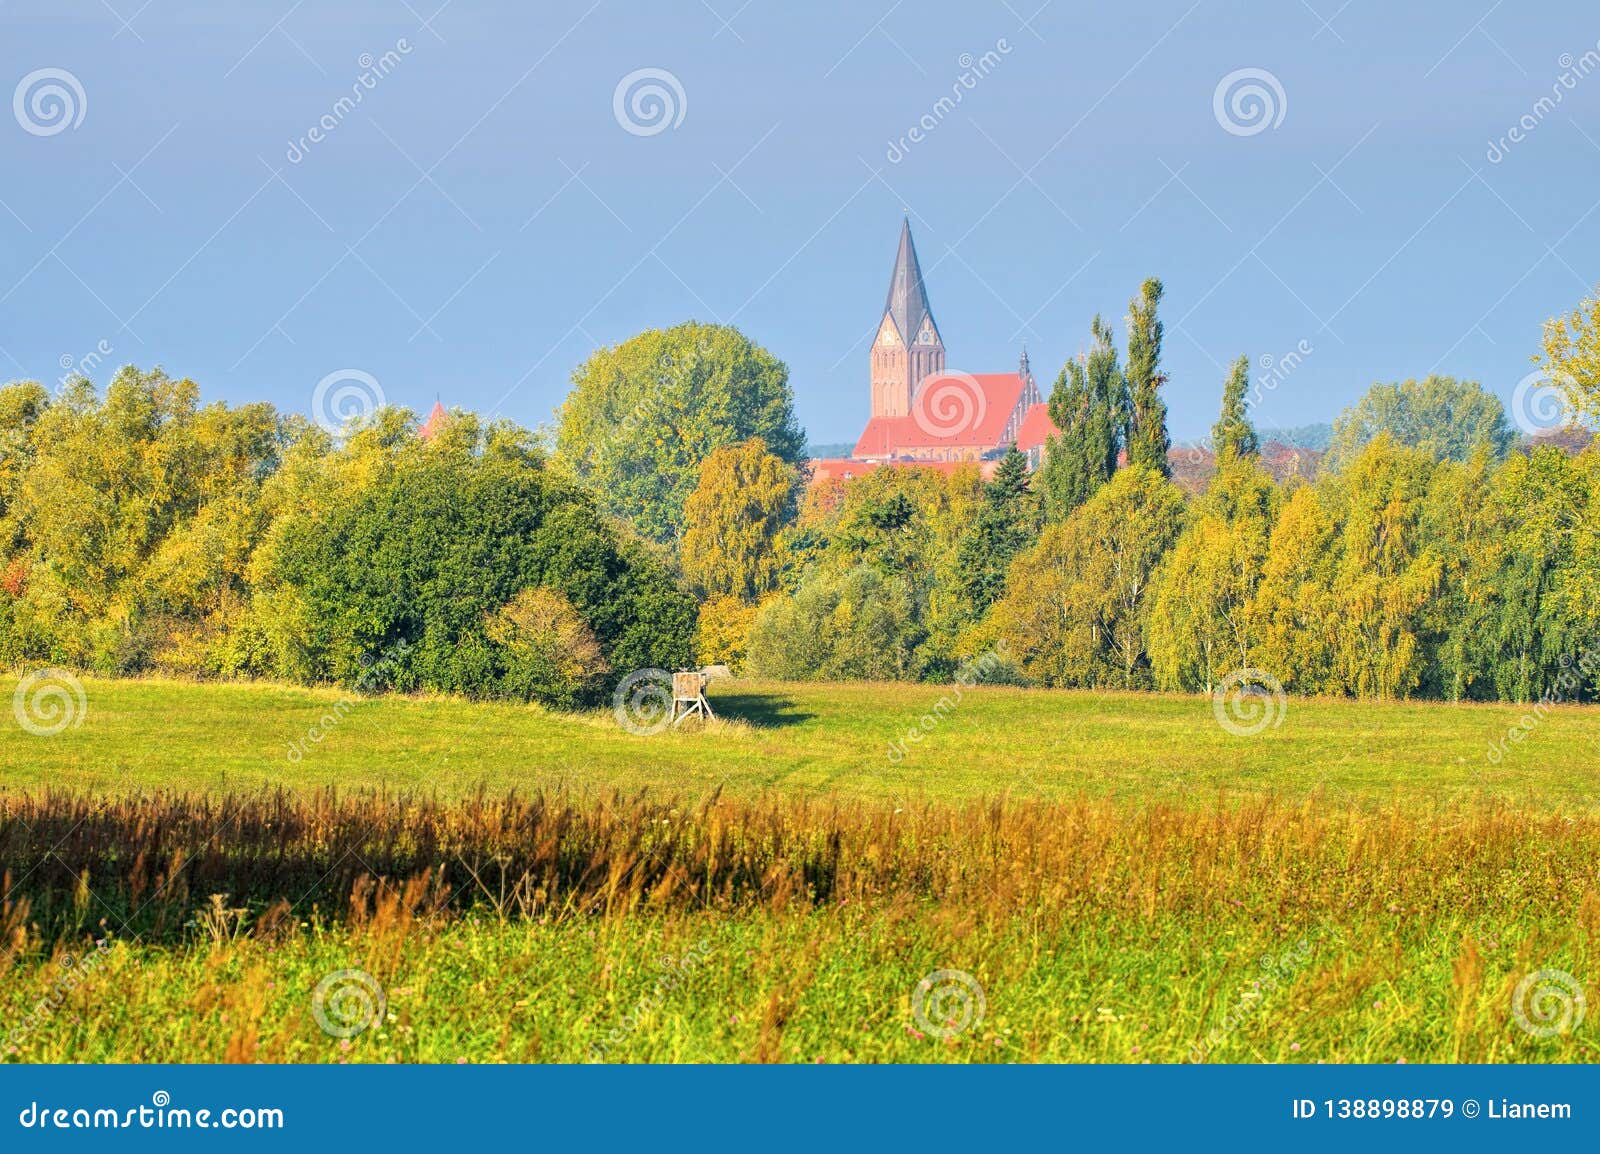 barth landscape and church, an old town in germany